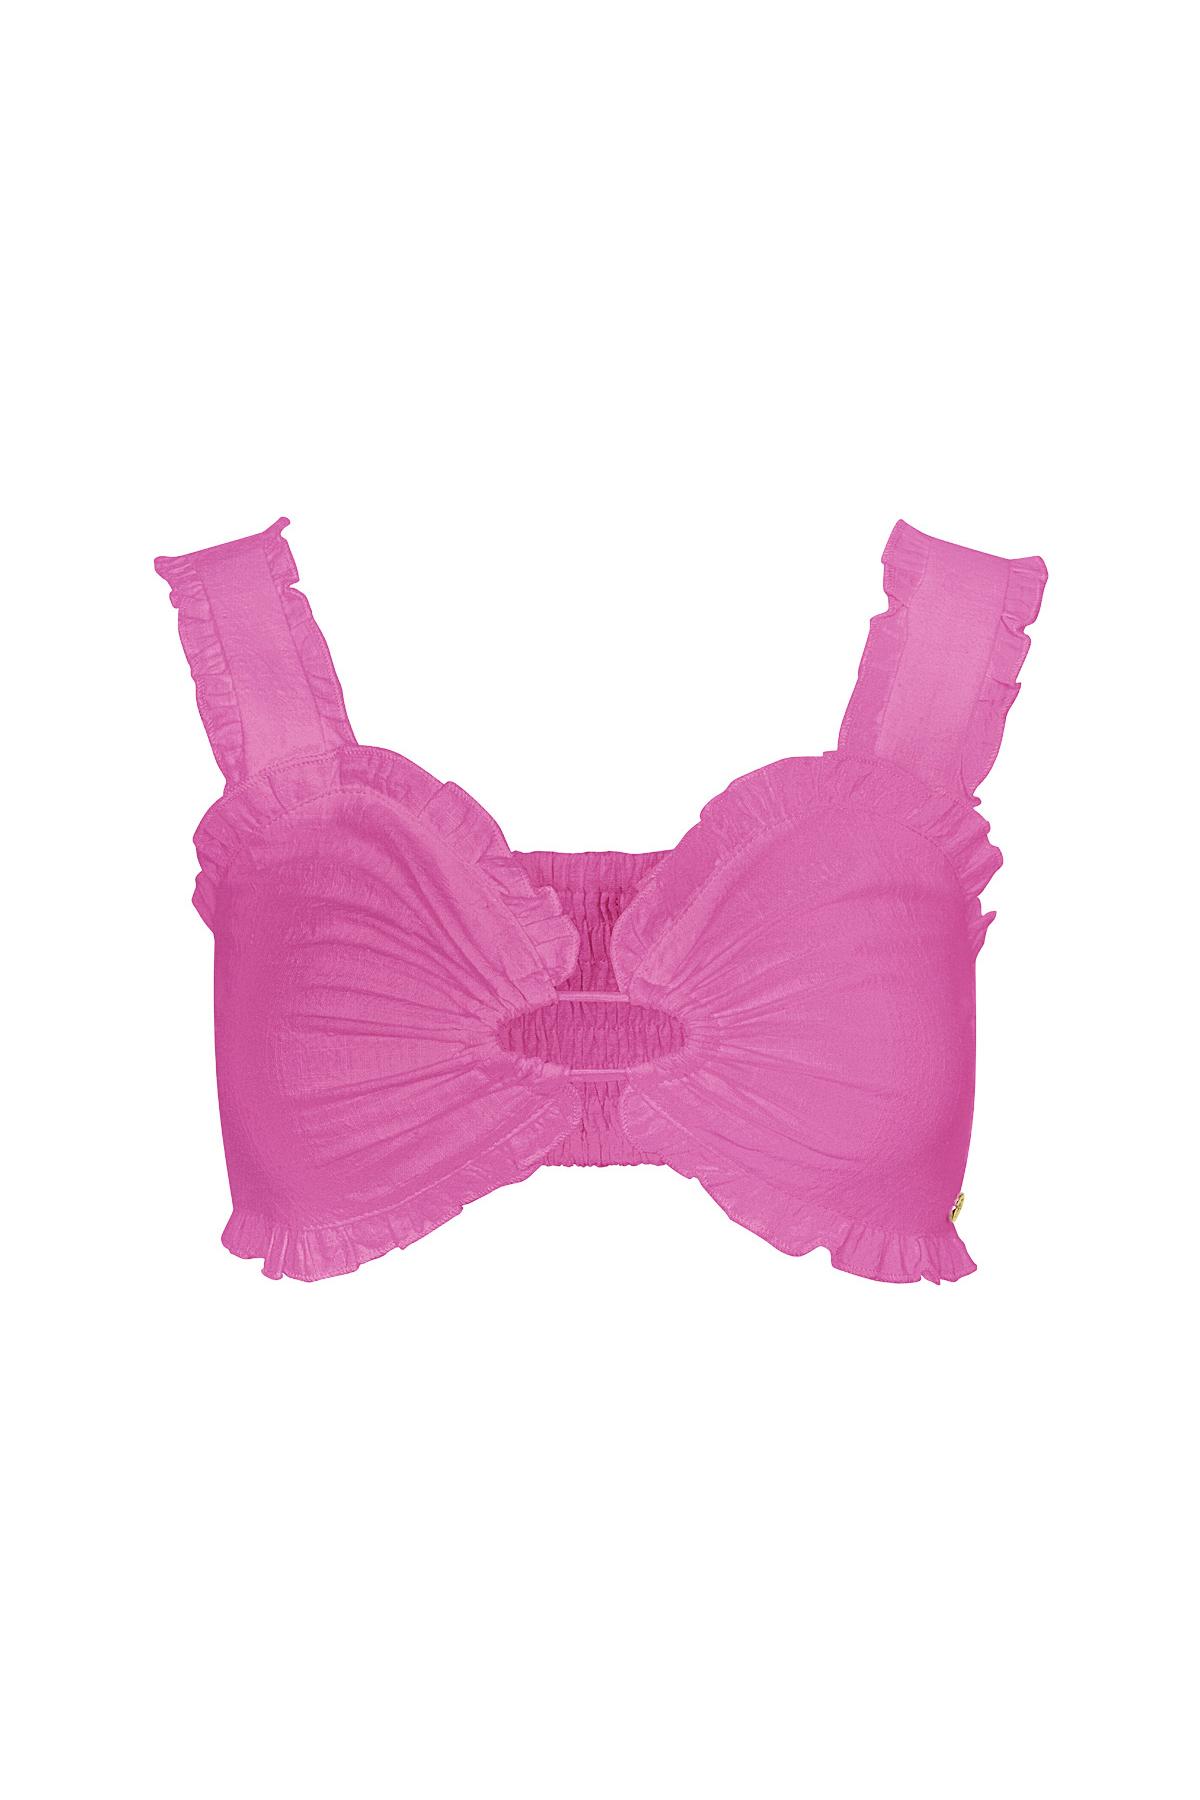 Crop top cut out - pink M